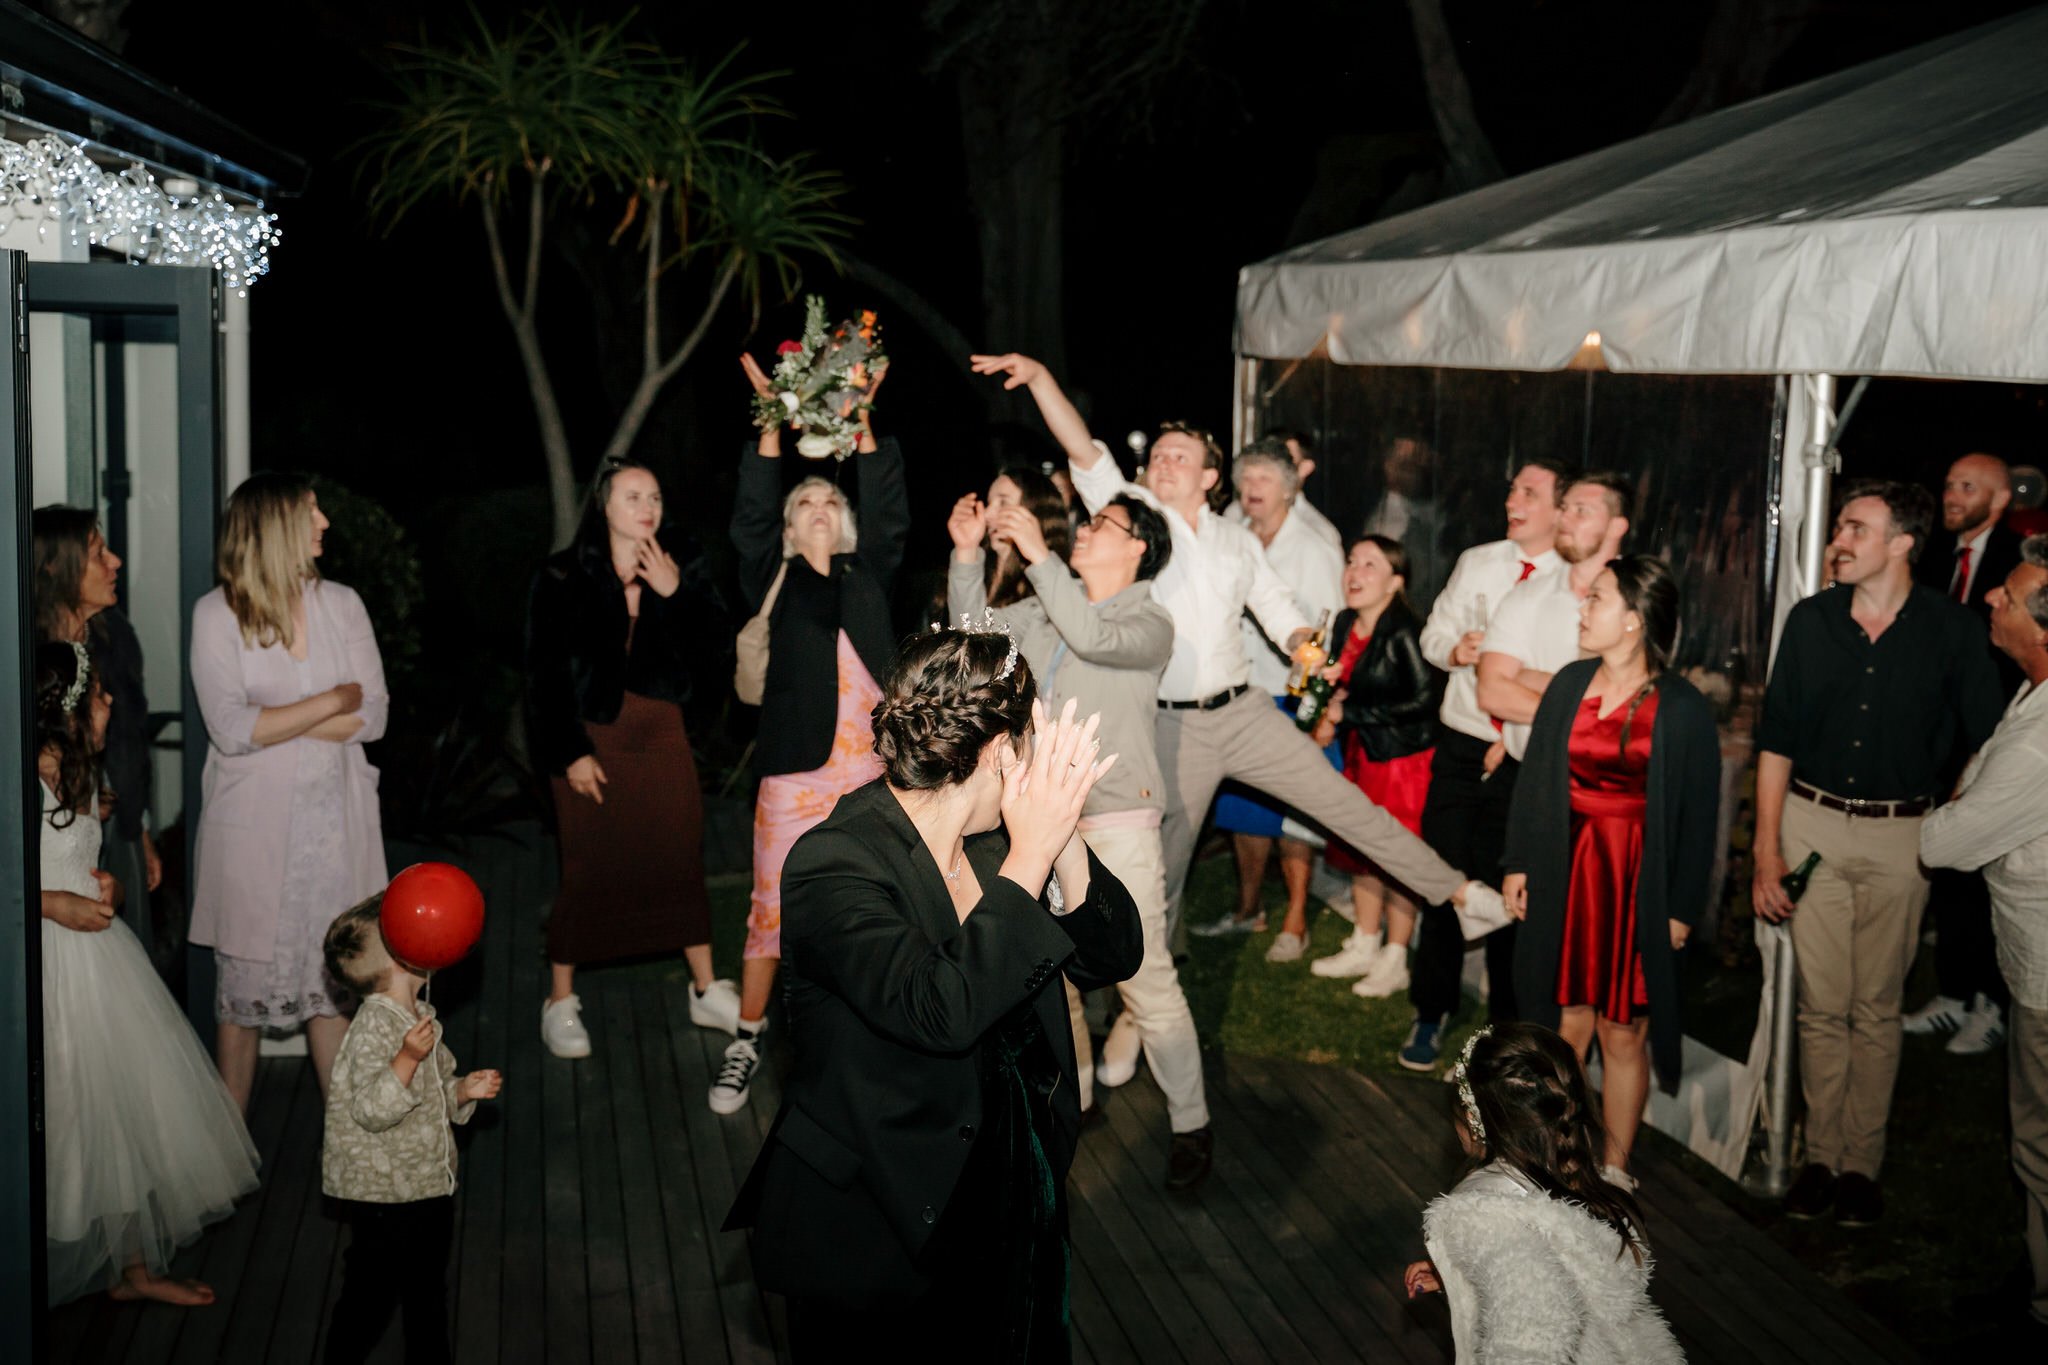 huntly-house-auckland-wedding-venue-mansion-vintage-luxury-accommodation-photographer-videography-dear-white-productions-photo-film-south-clarks-beach (124).jpg